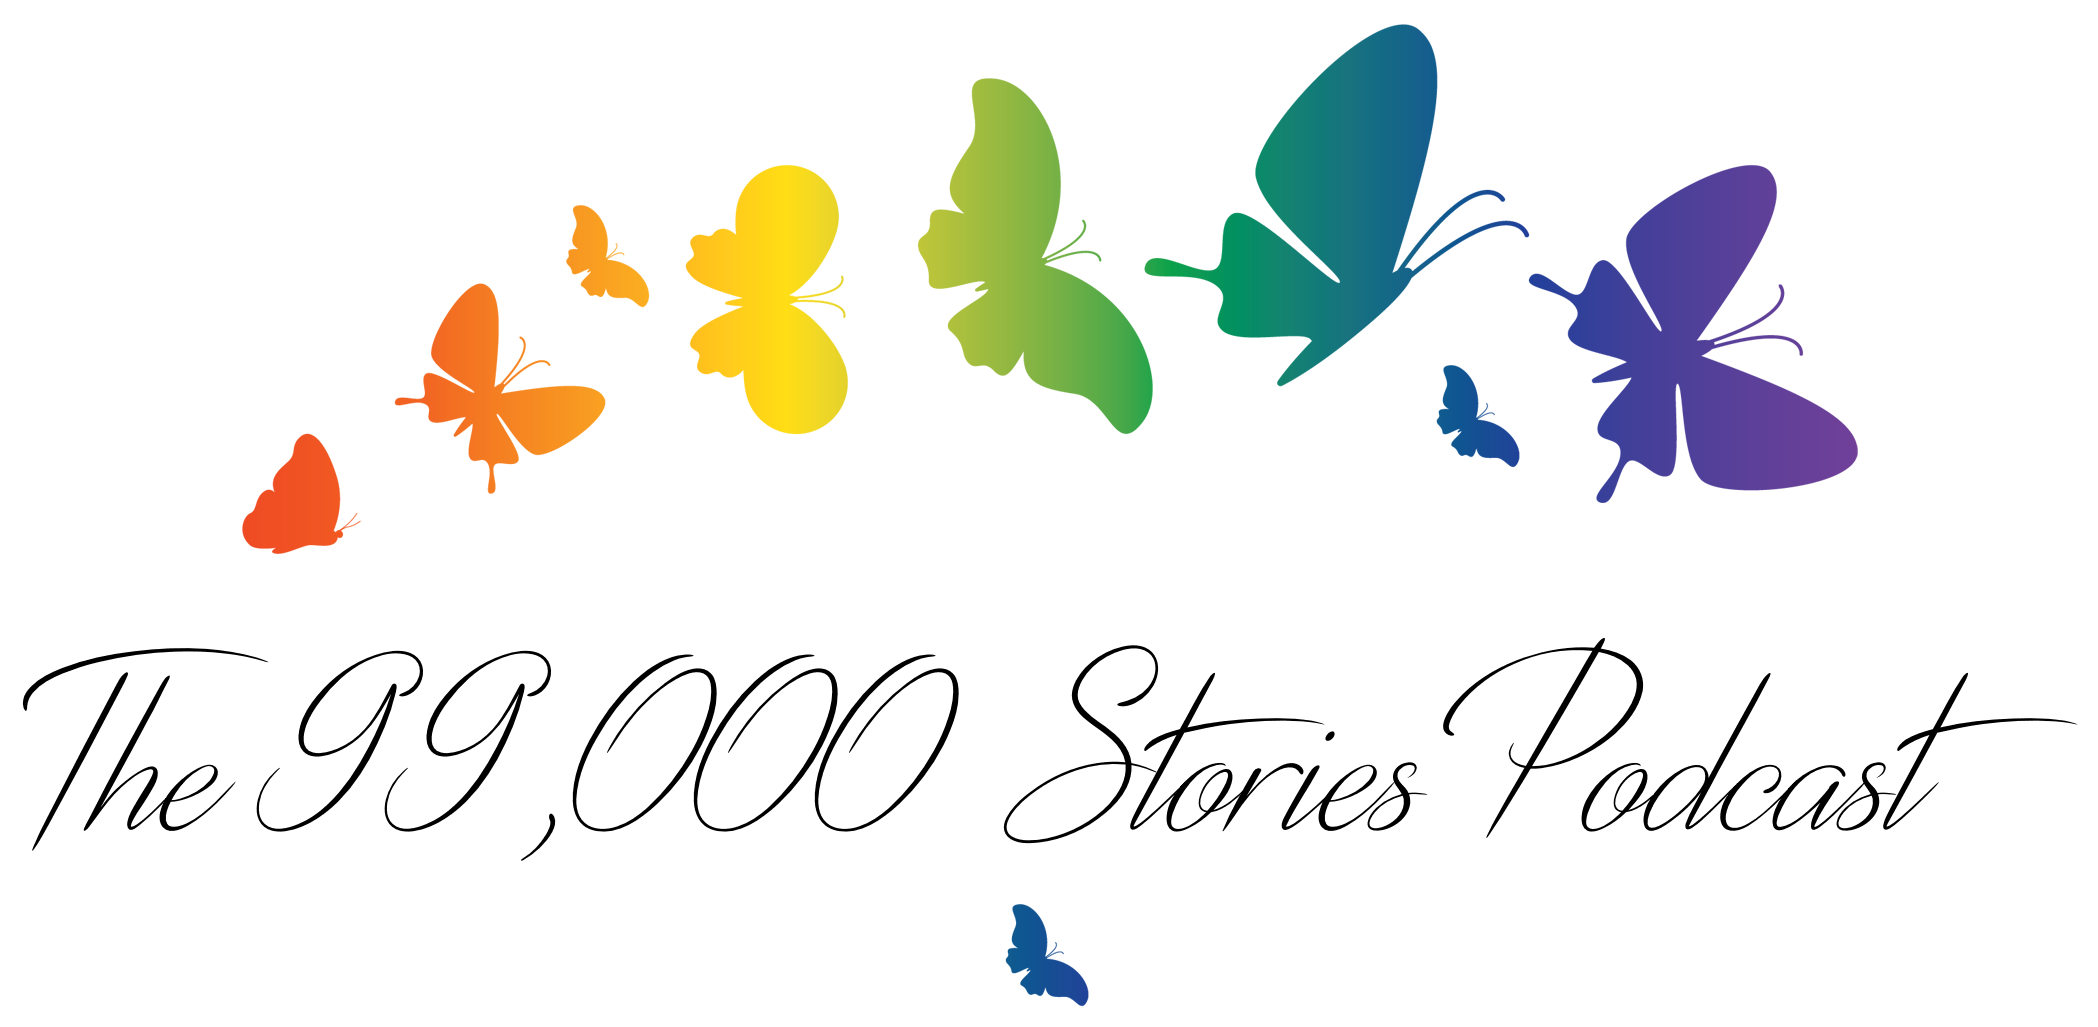 The 88,000 Stories Podcast